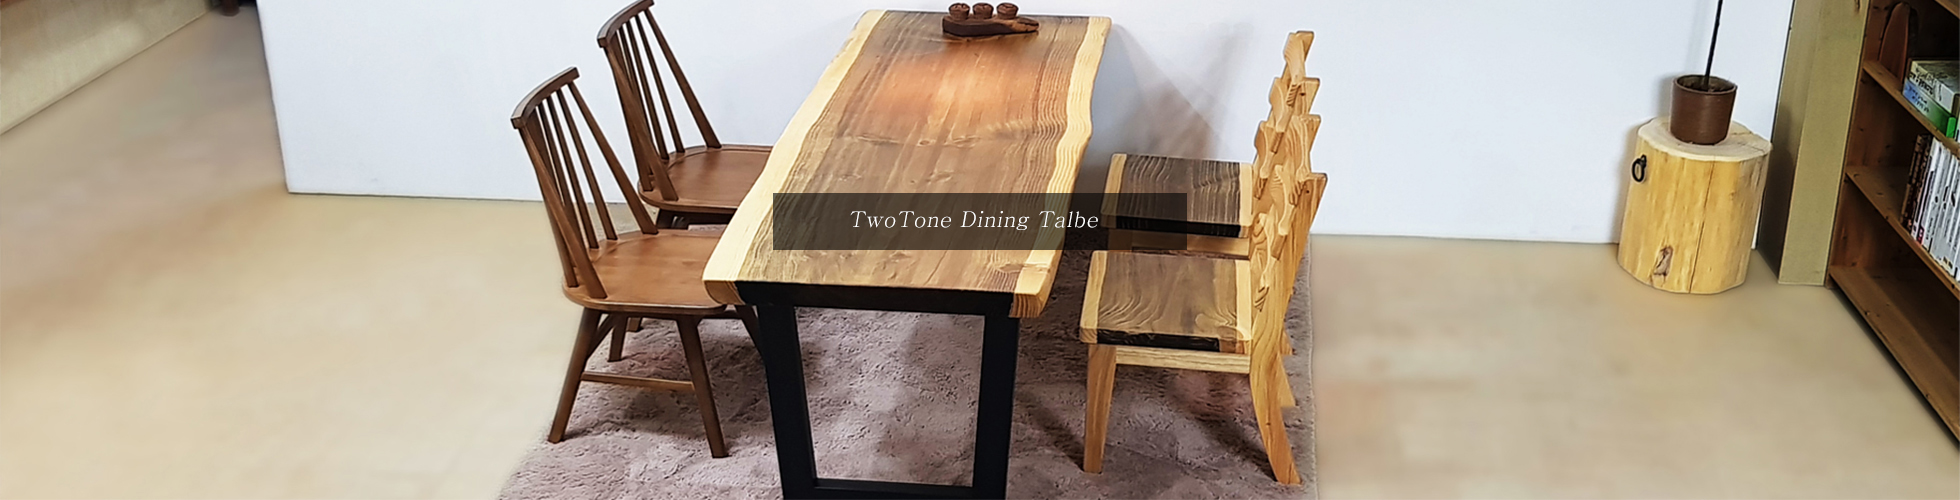 twotone woodslab + toto chair